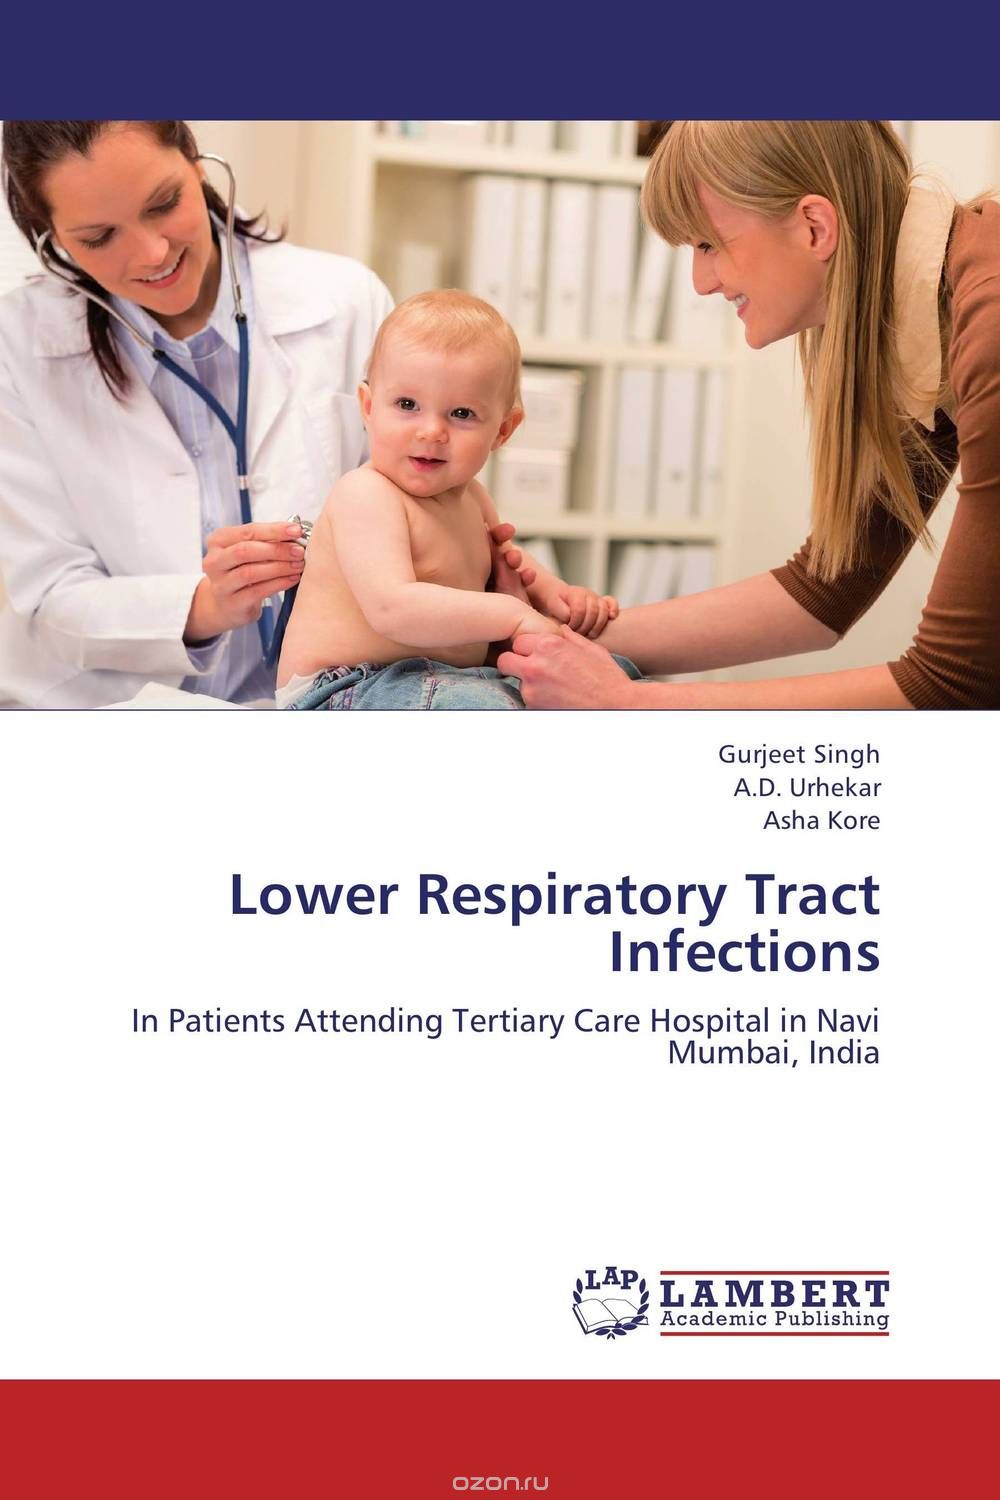 Lower Respiratory Tract Infections